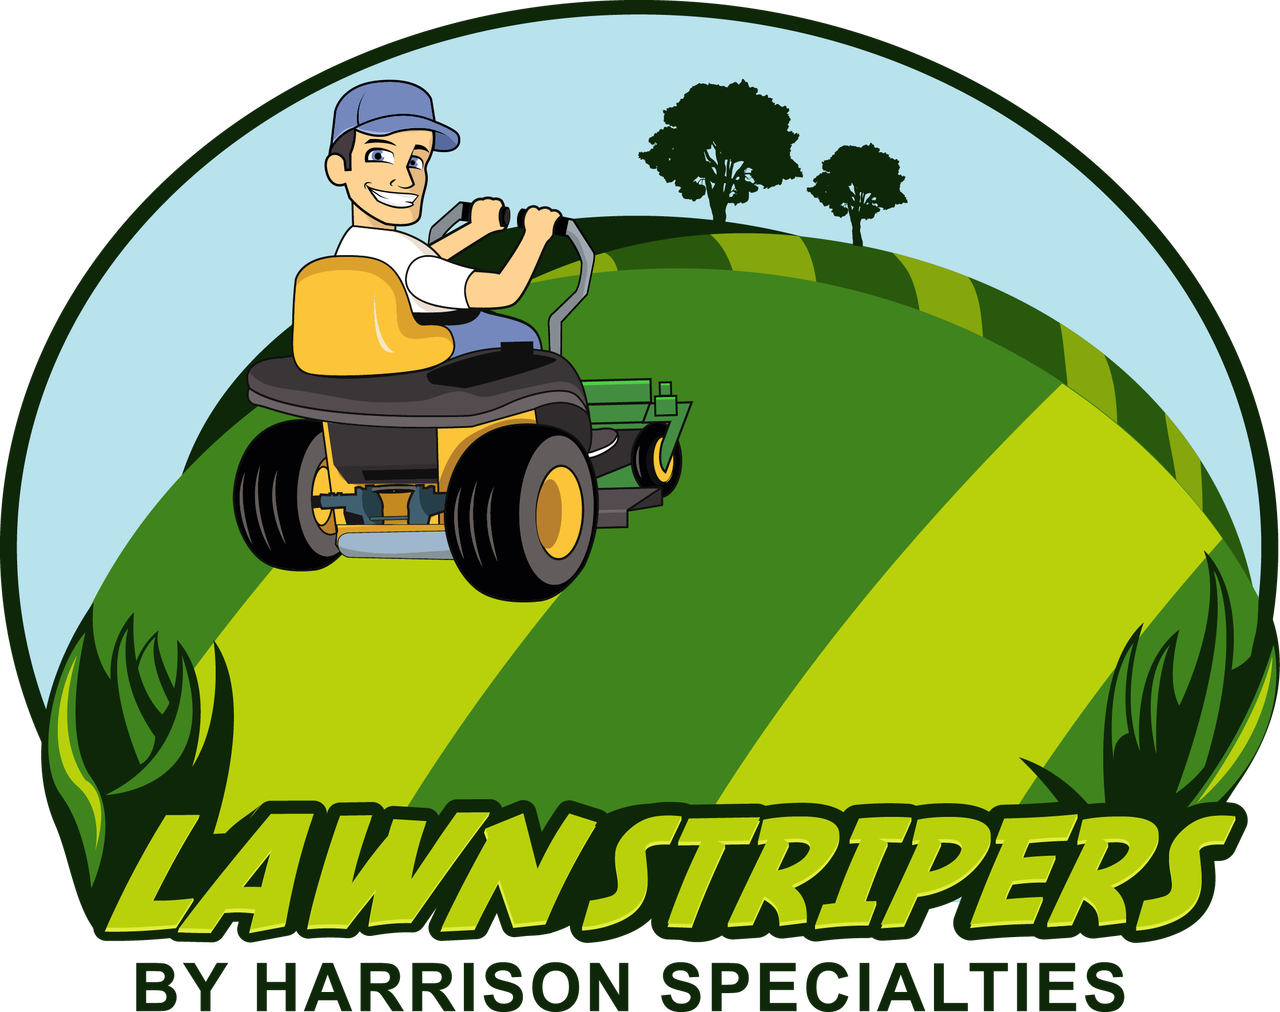 Lawn Striping Kit for John Deere 2008-2016 900 series with Pro 54" 7 Iron deck